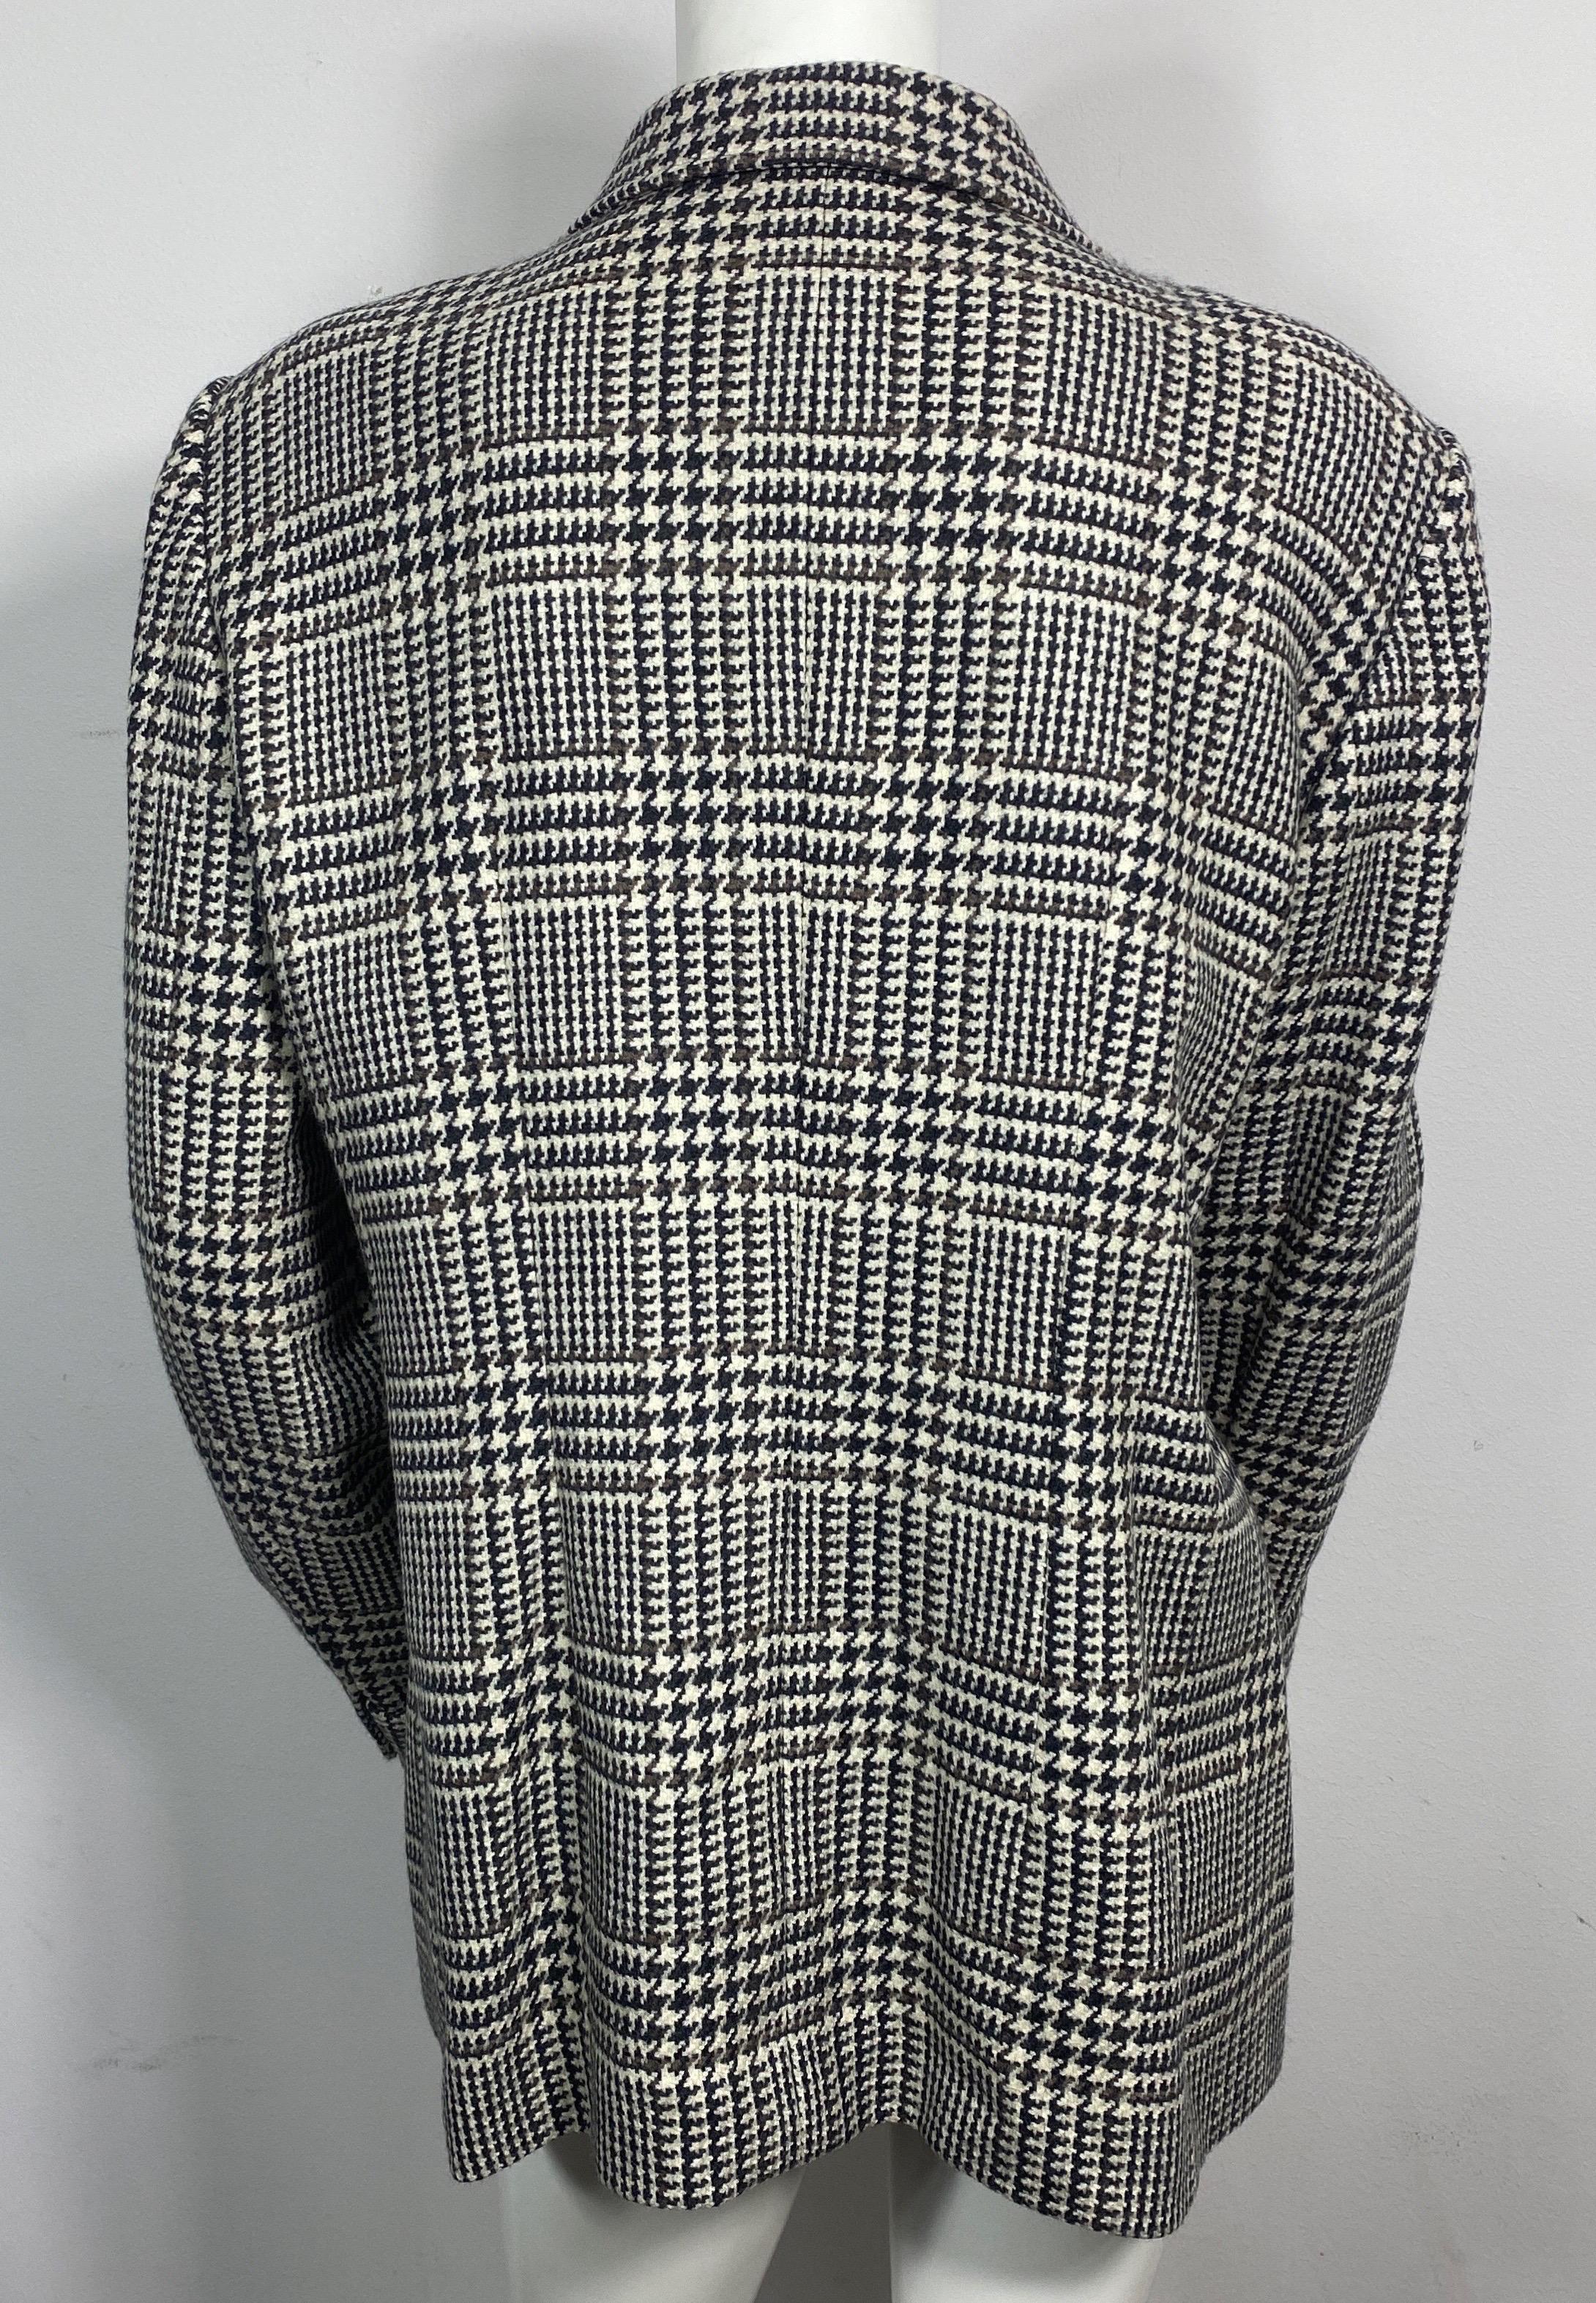 Gucci Houndstooth 1980’s Wool Blazer Jacket-Size 48 For Sale 7